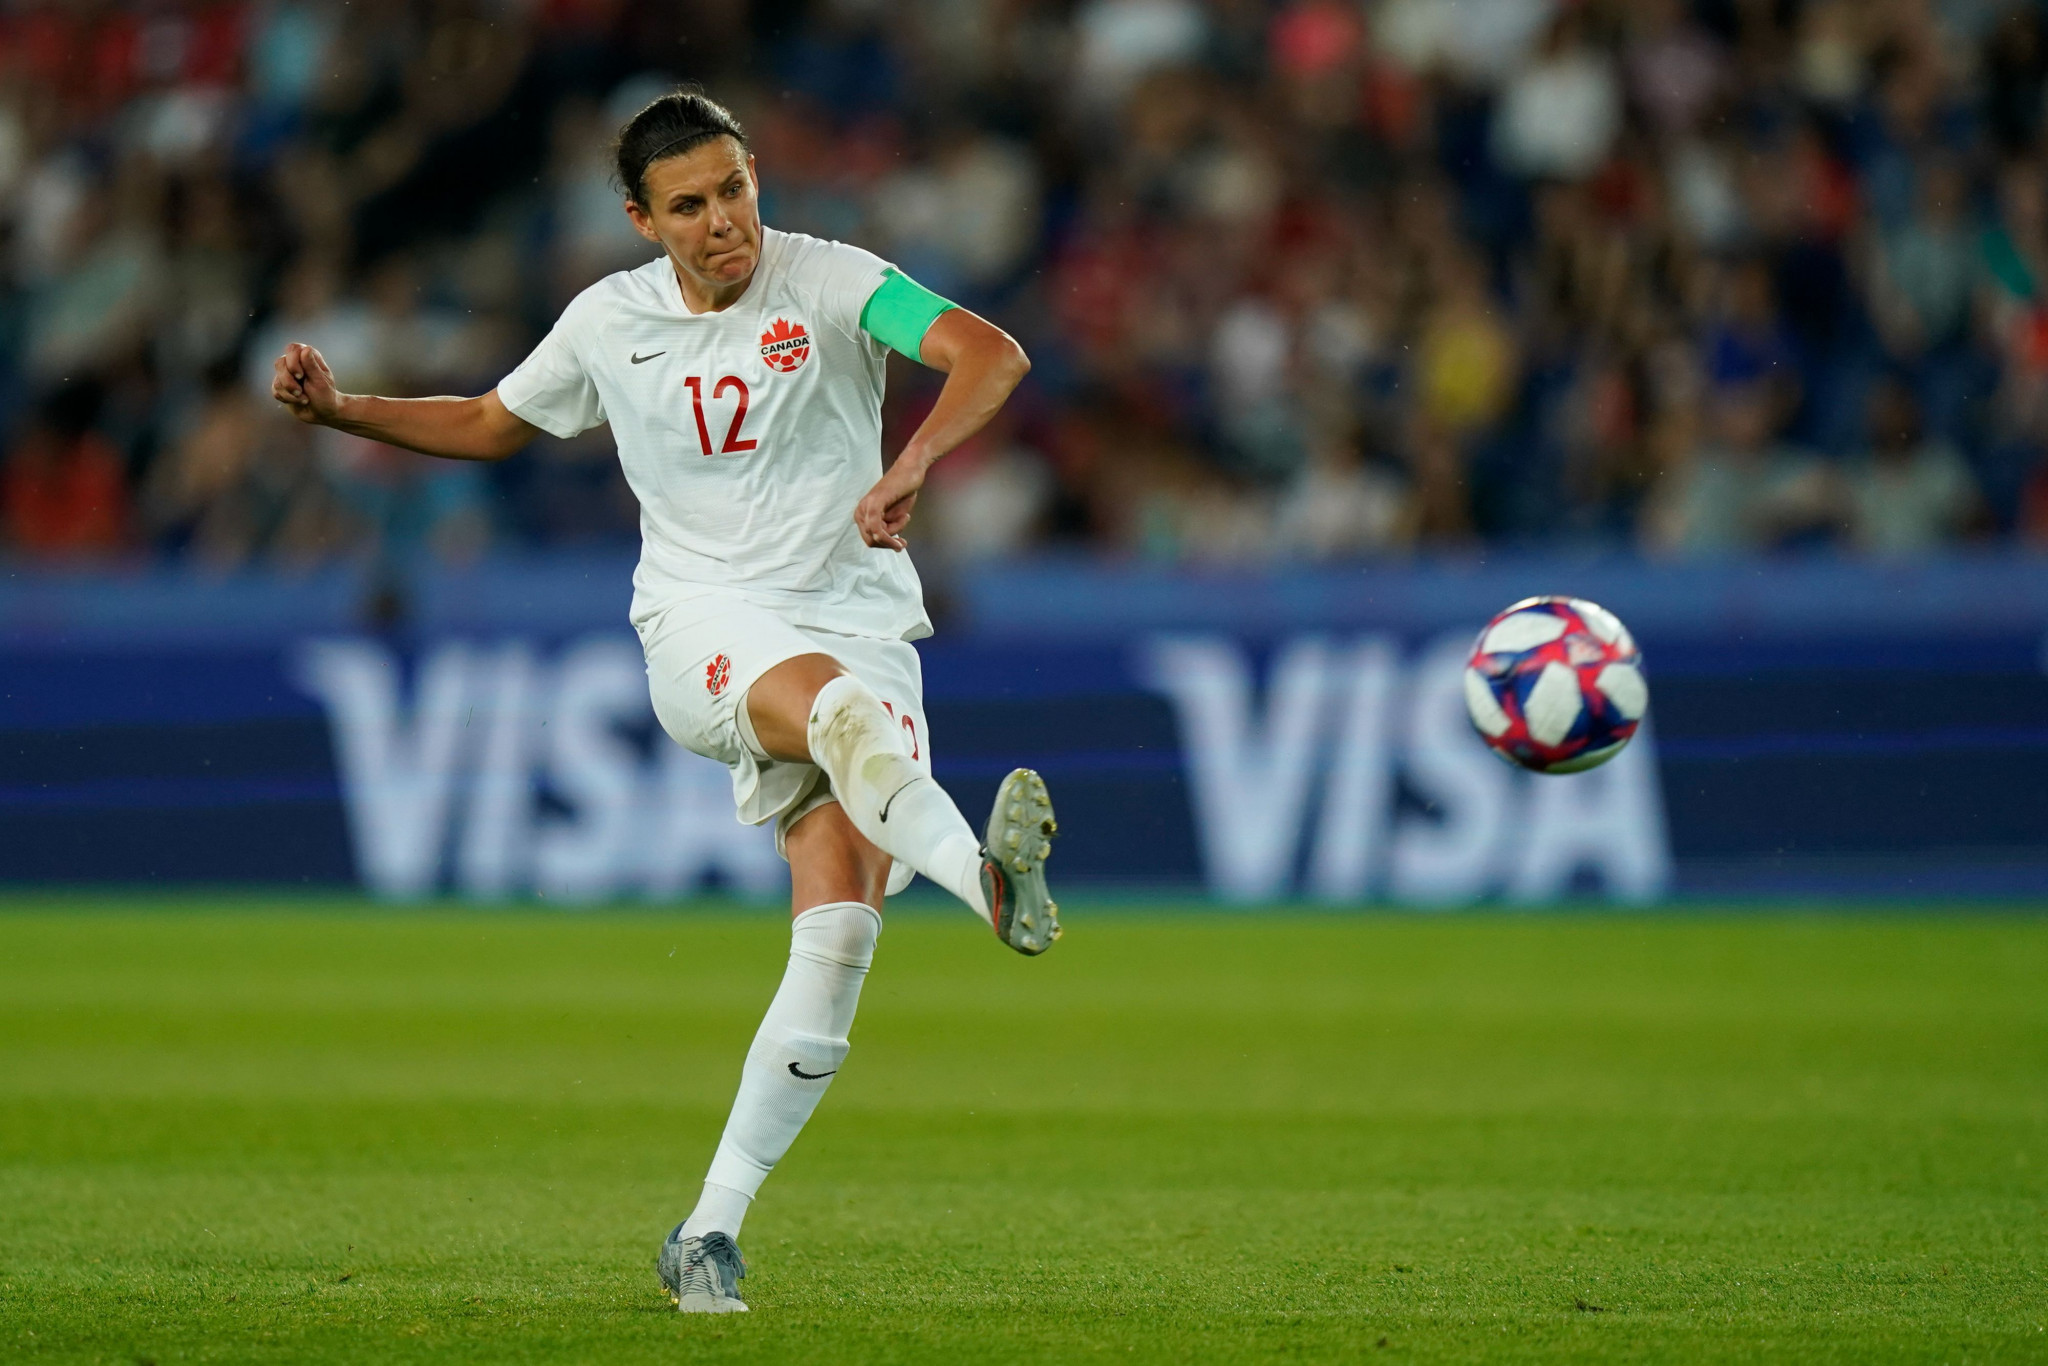 Christine Sinclair, Canada's all-time leading scorer, will aim to qualify for her fourth Olympics at the age of 36 ©Getty Images